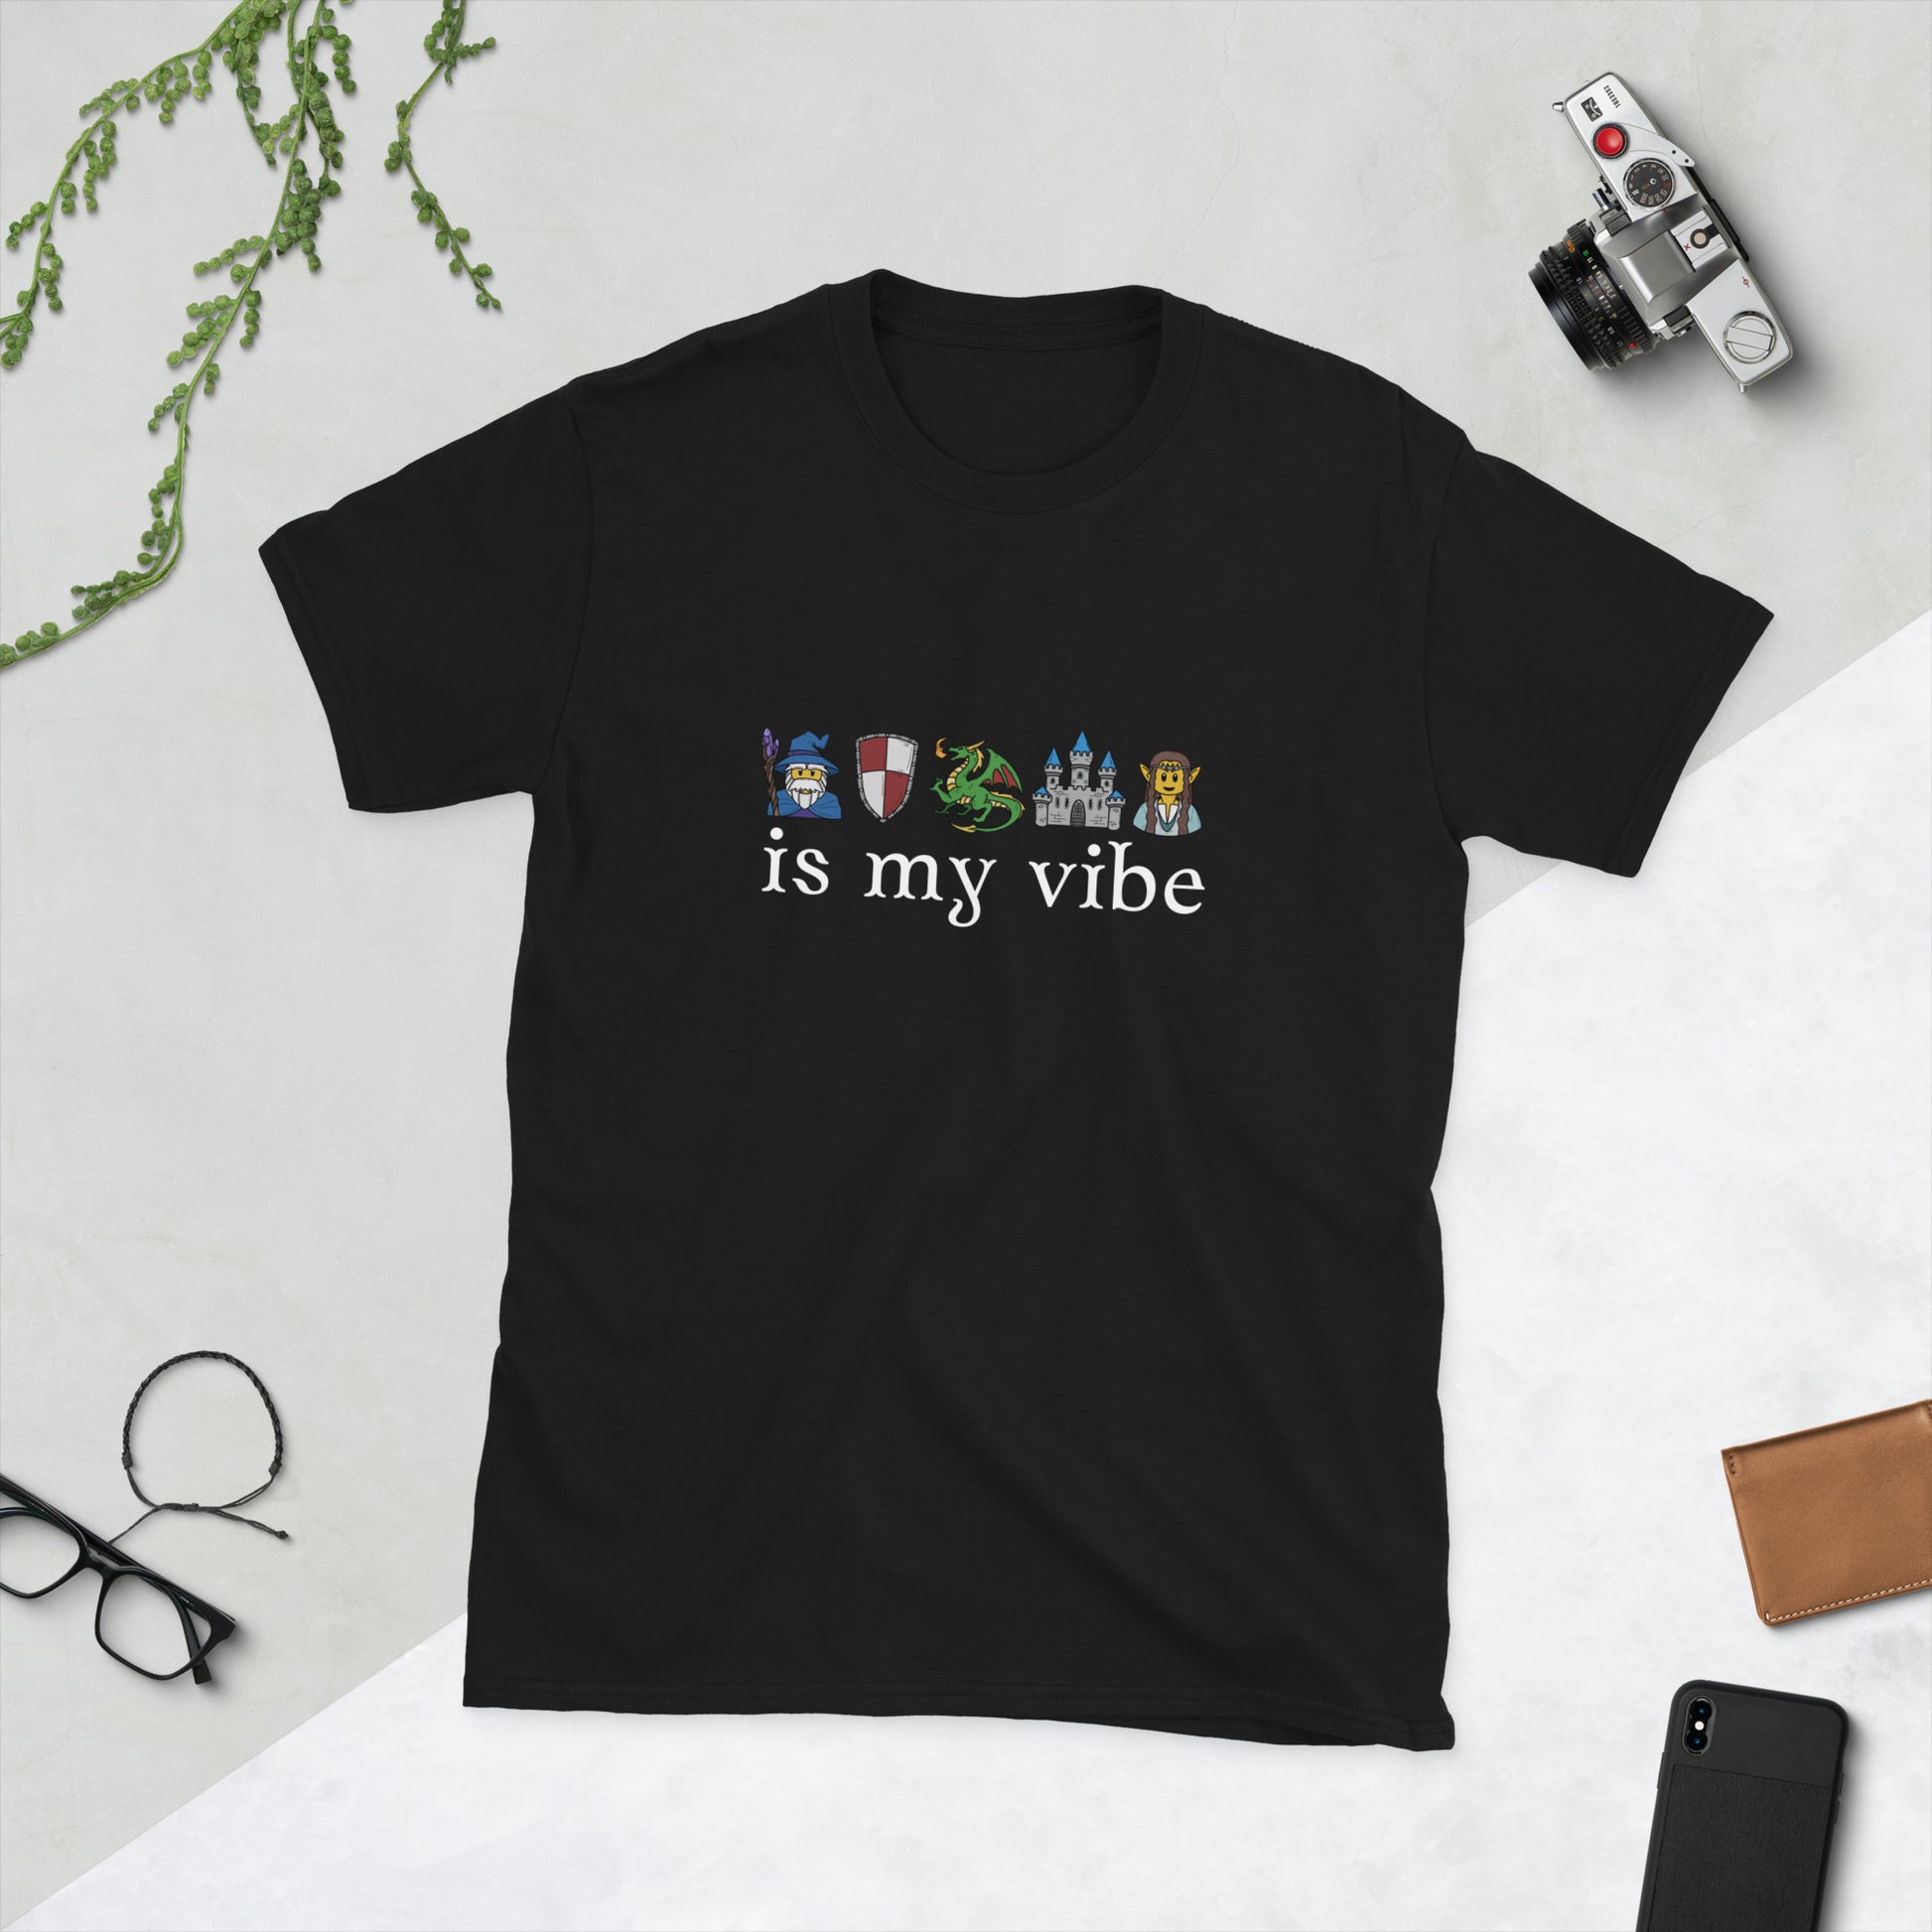 Fantasy is my vibe, medieval emoticon style Short-Sleeve Unisex T-Shirt  Level 1 Gamers Black S 